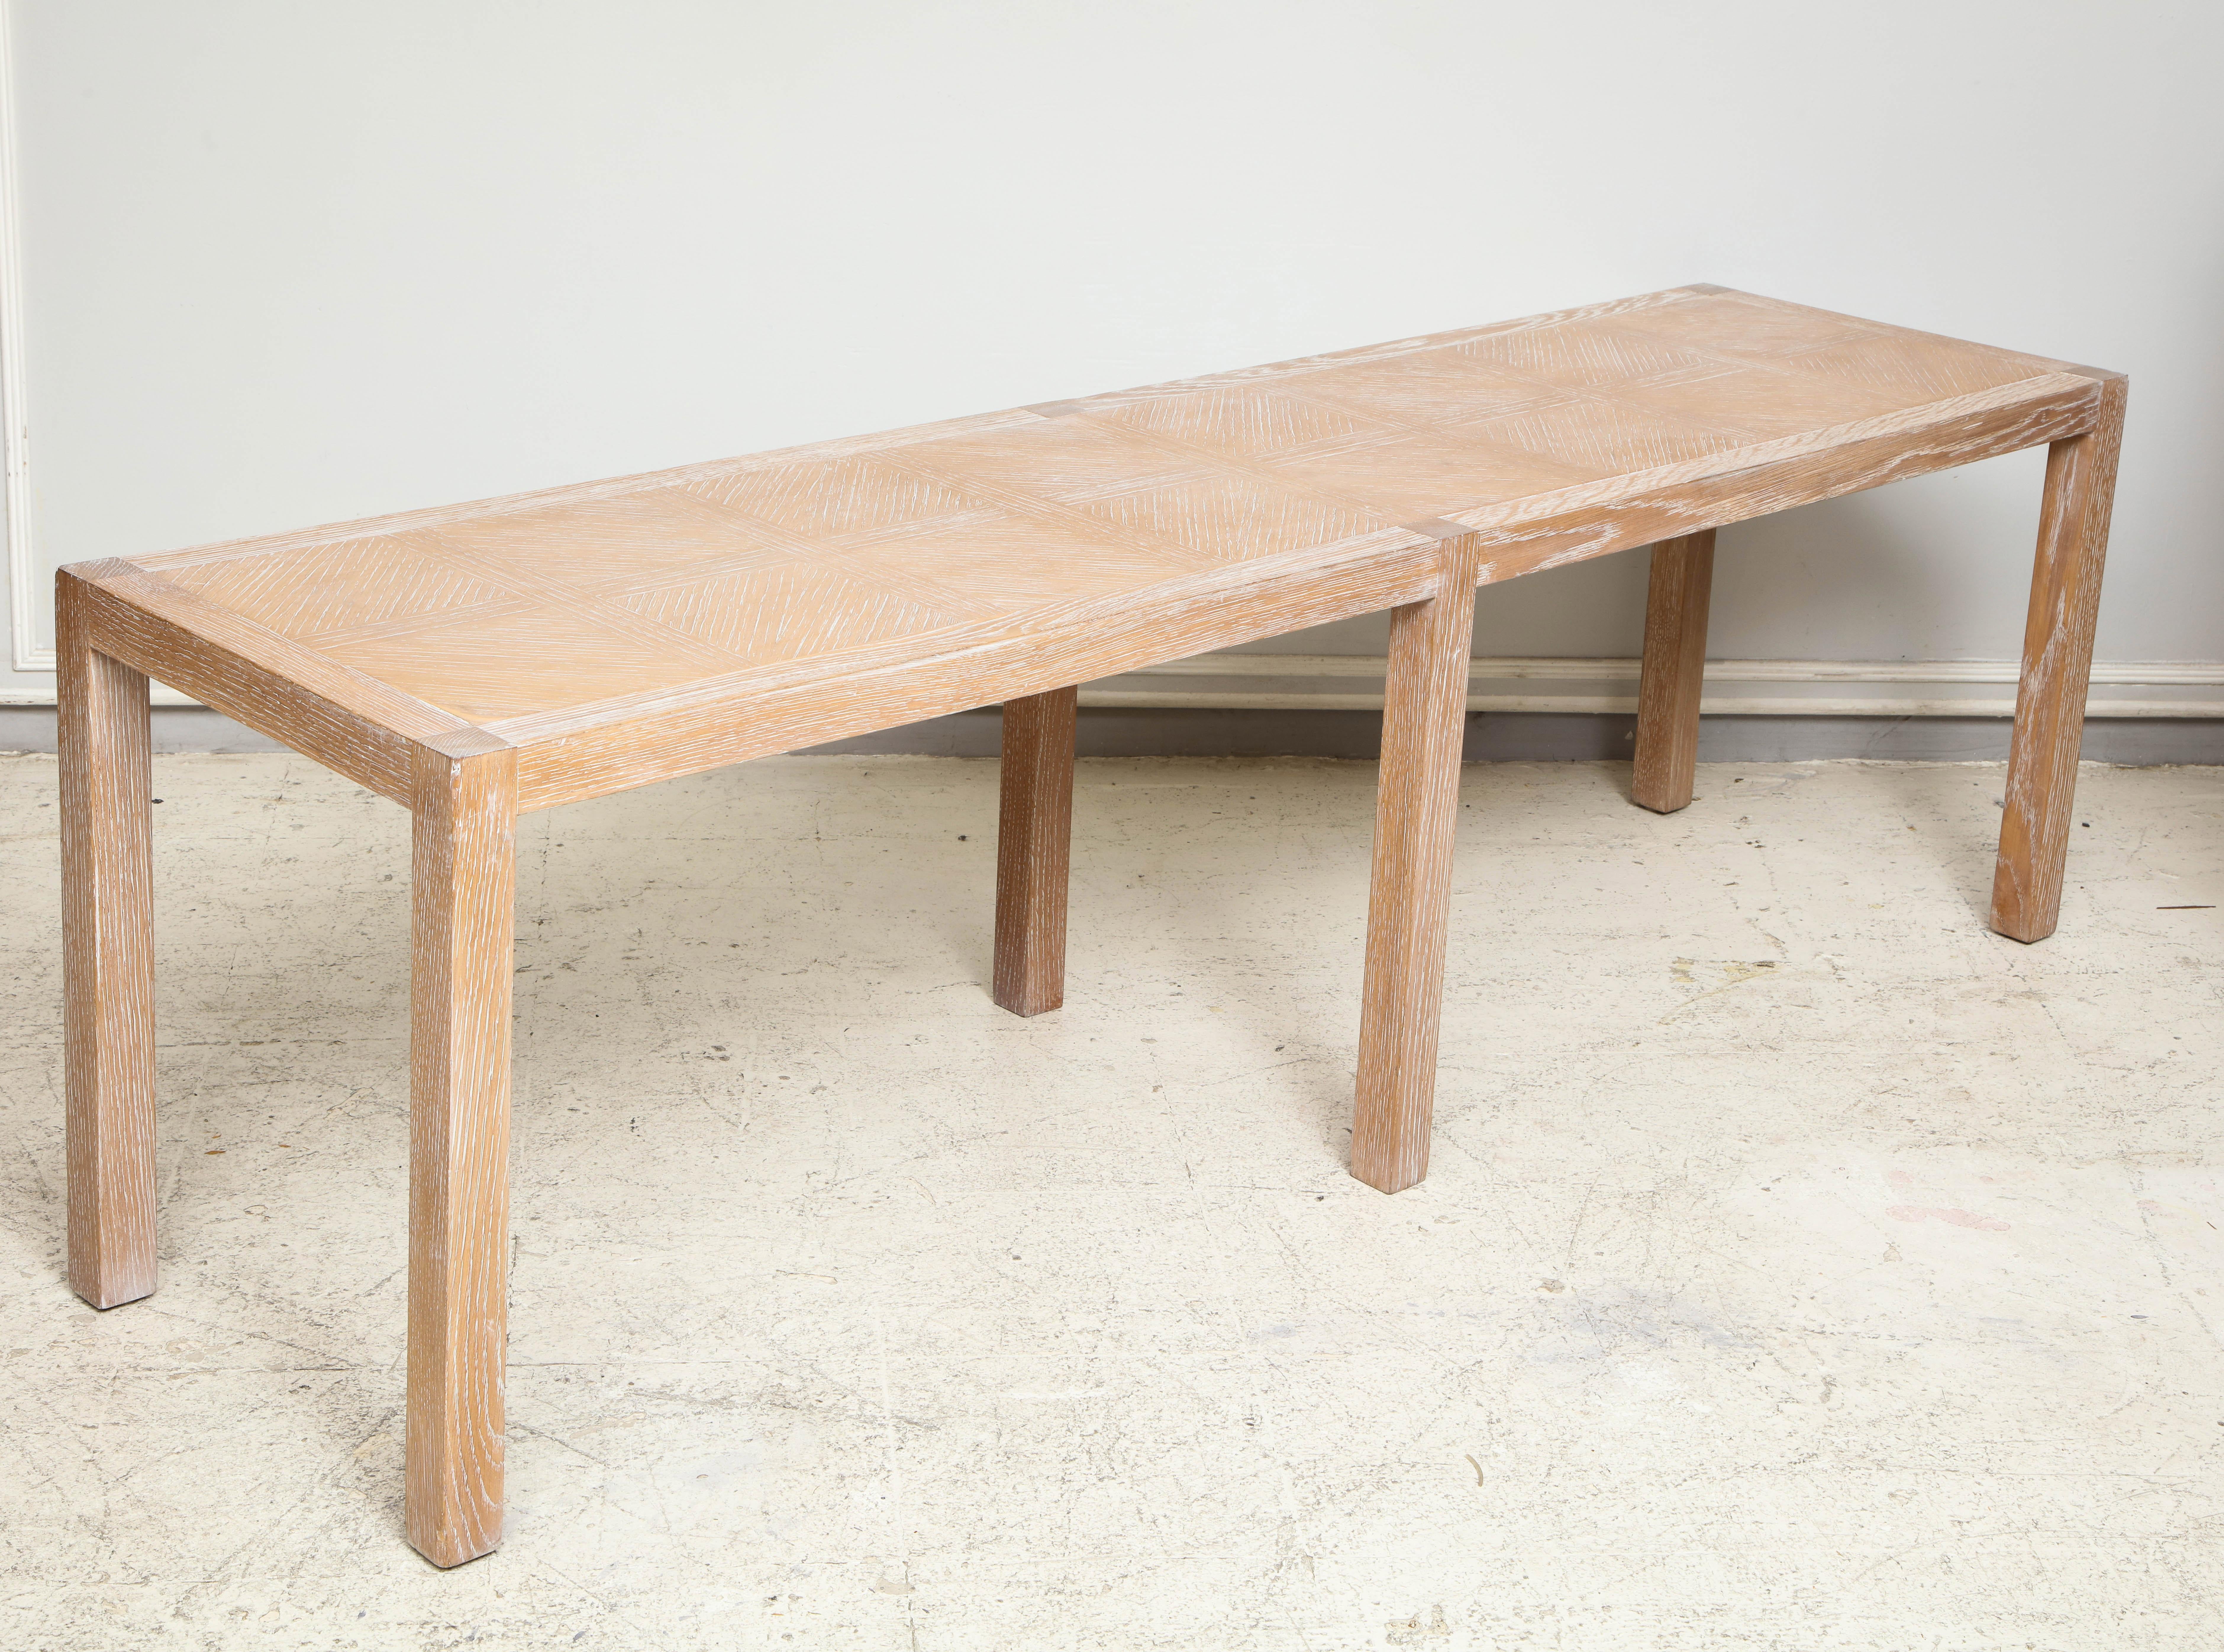 Pair of cerused oak parquetry long benches (also sold separately).